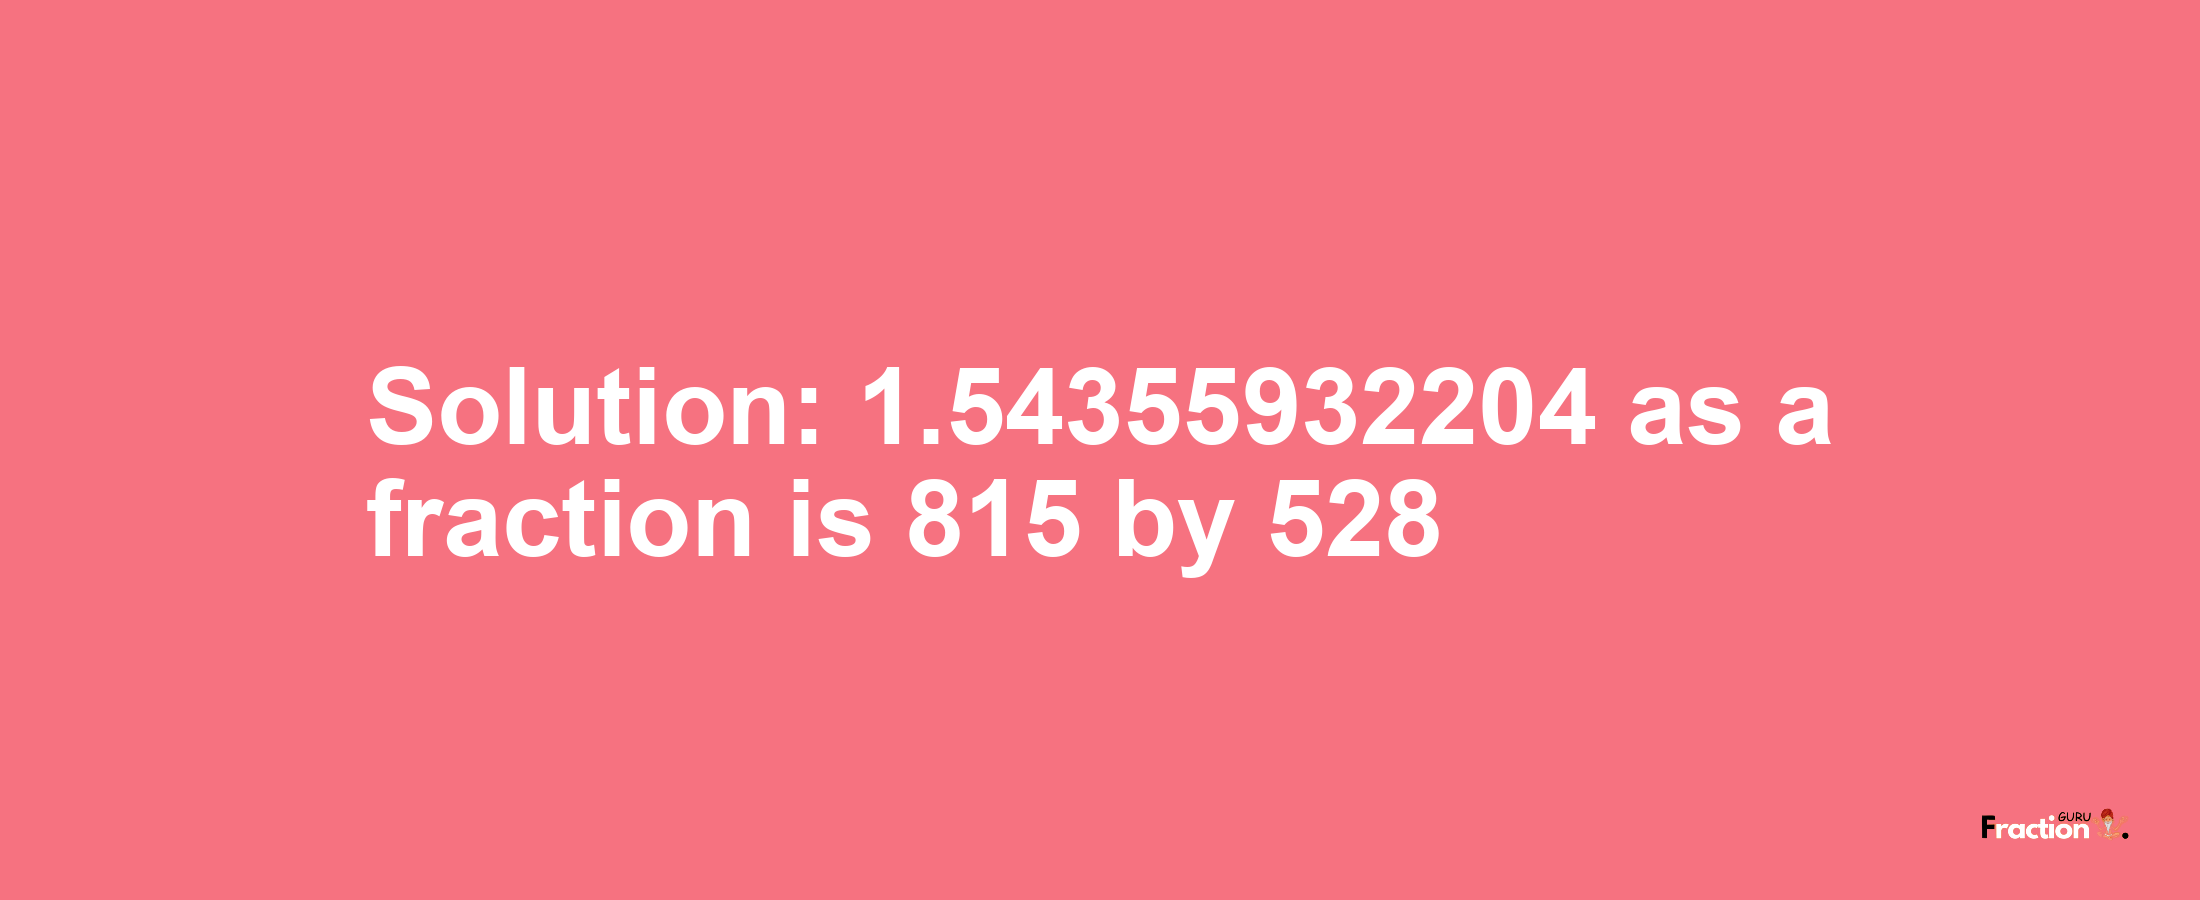 Solution:1.54355932204 as a fraction is 815/528